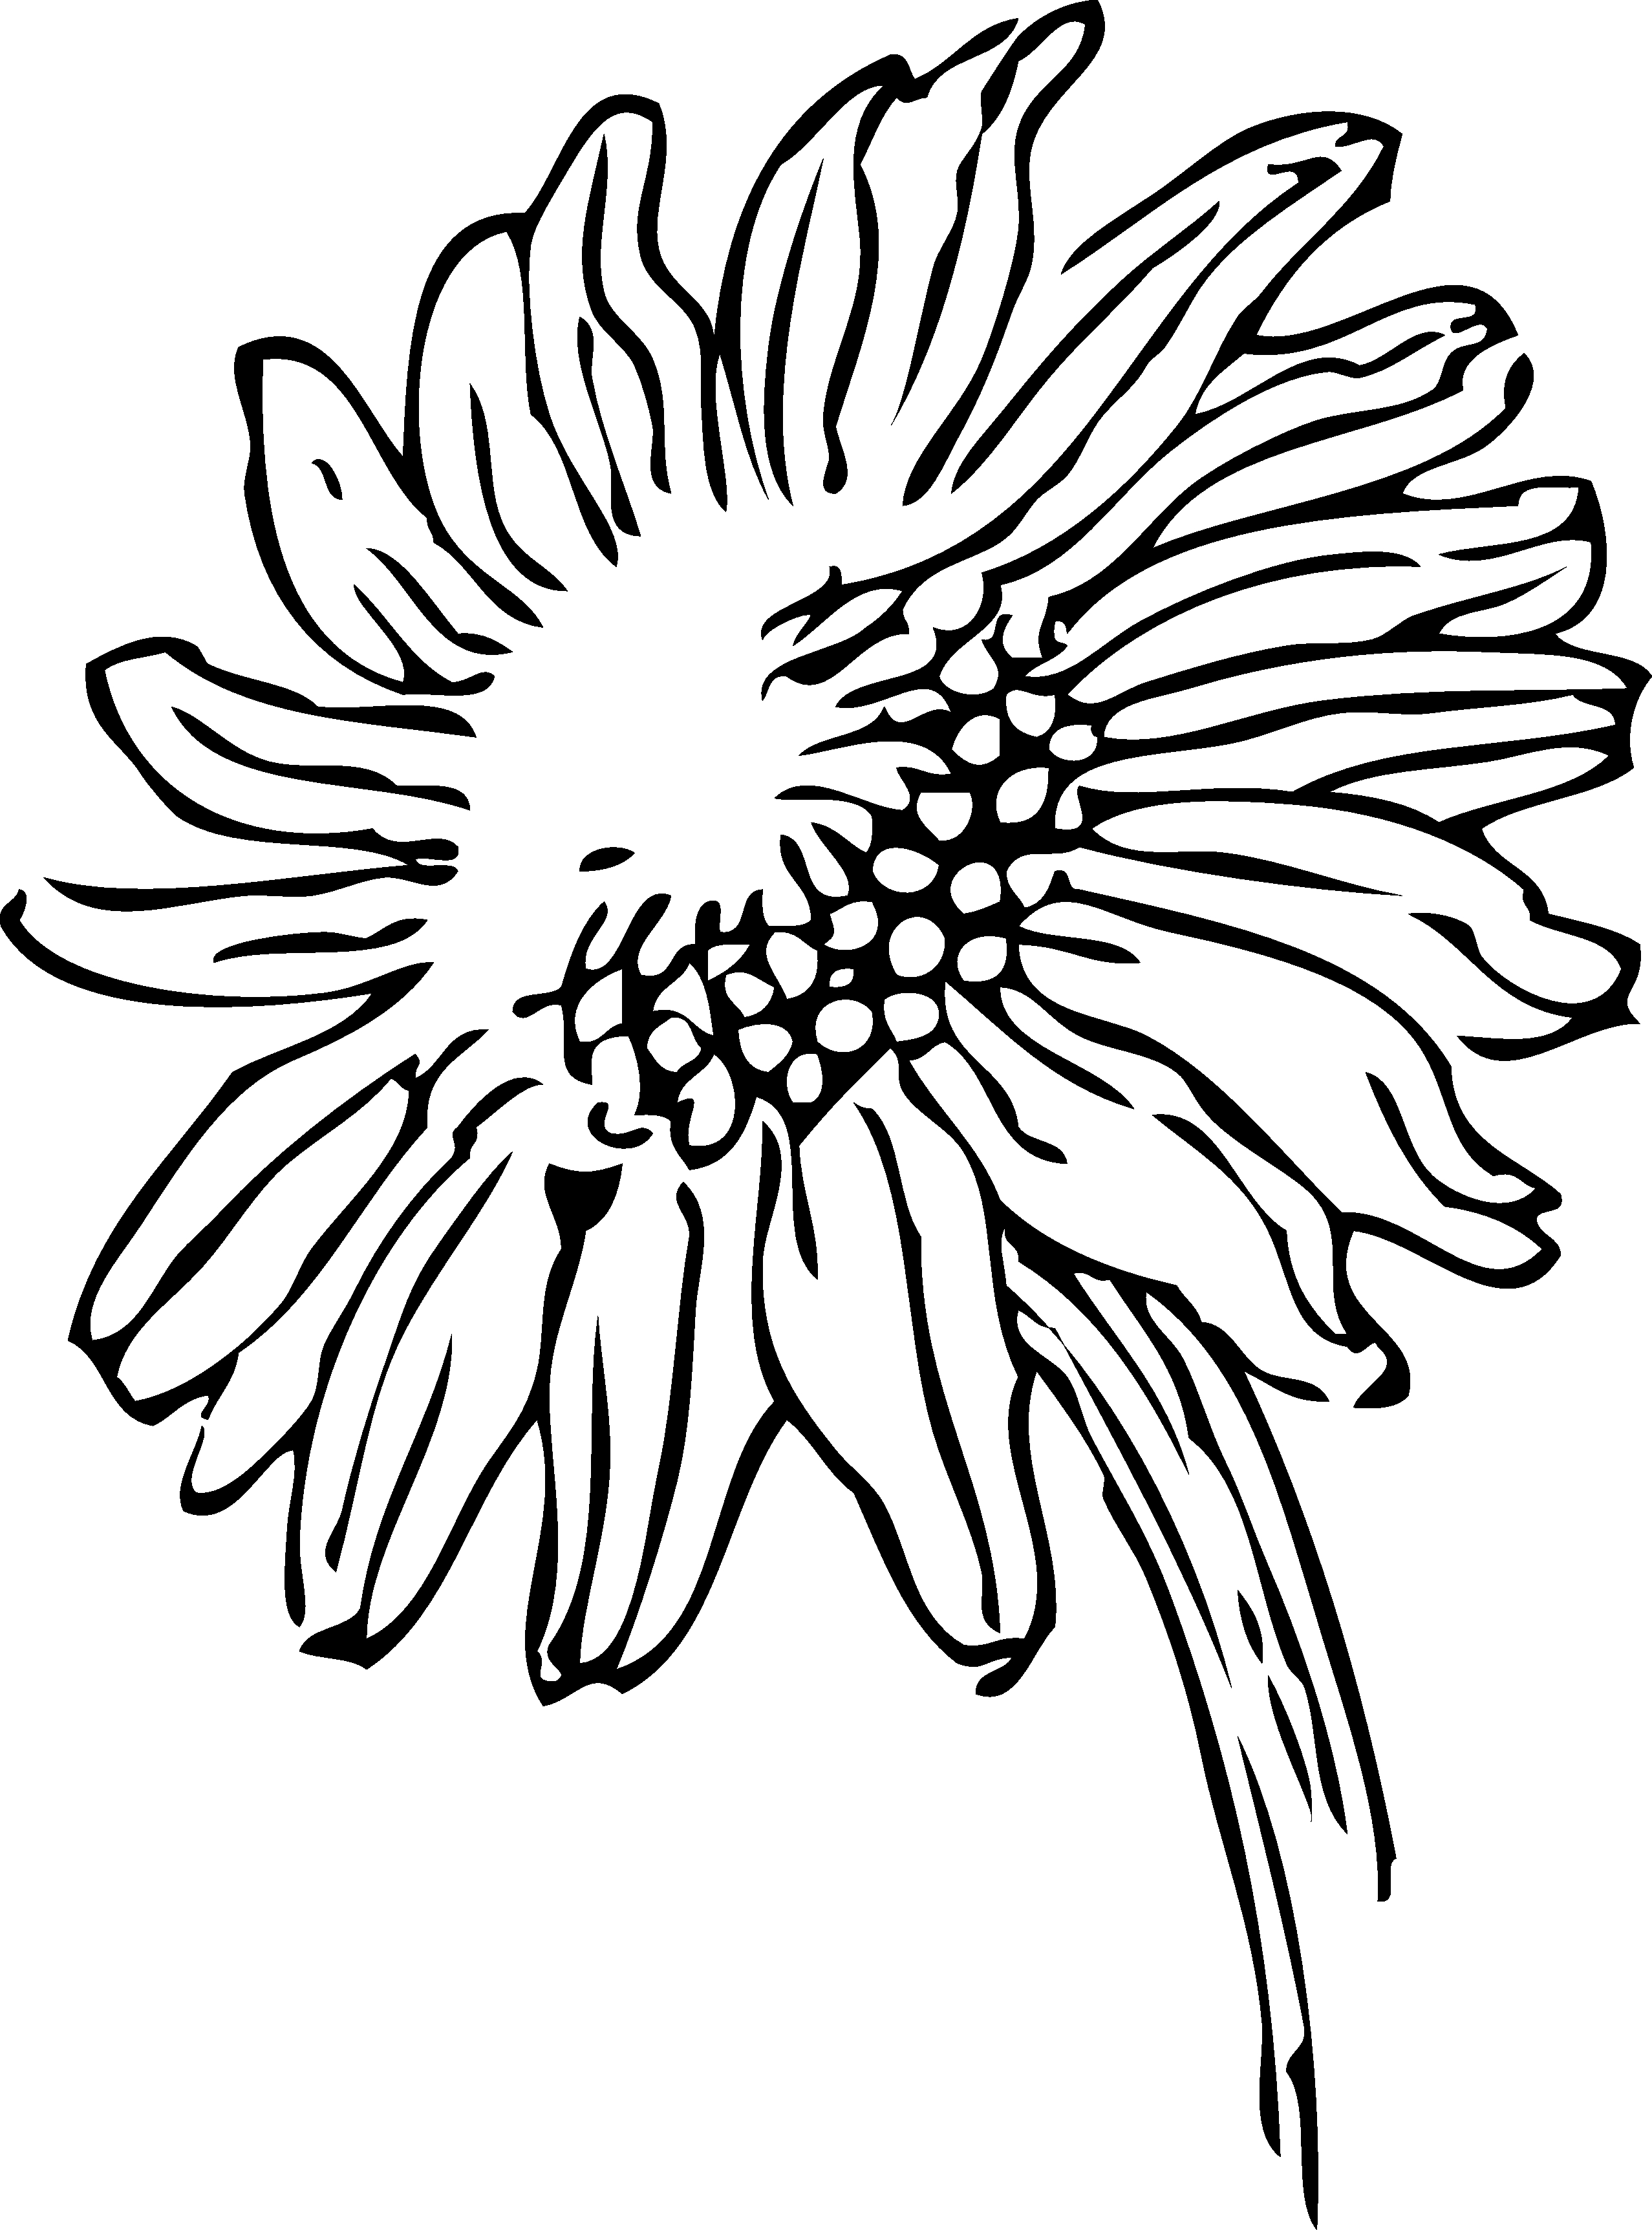 Black And White Sunflower Drawing